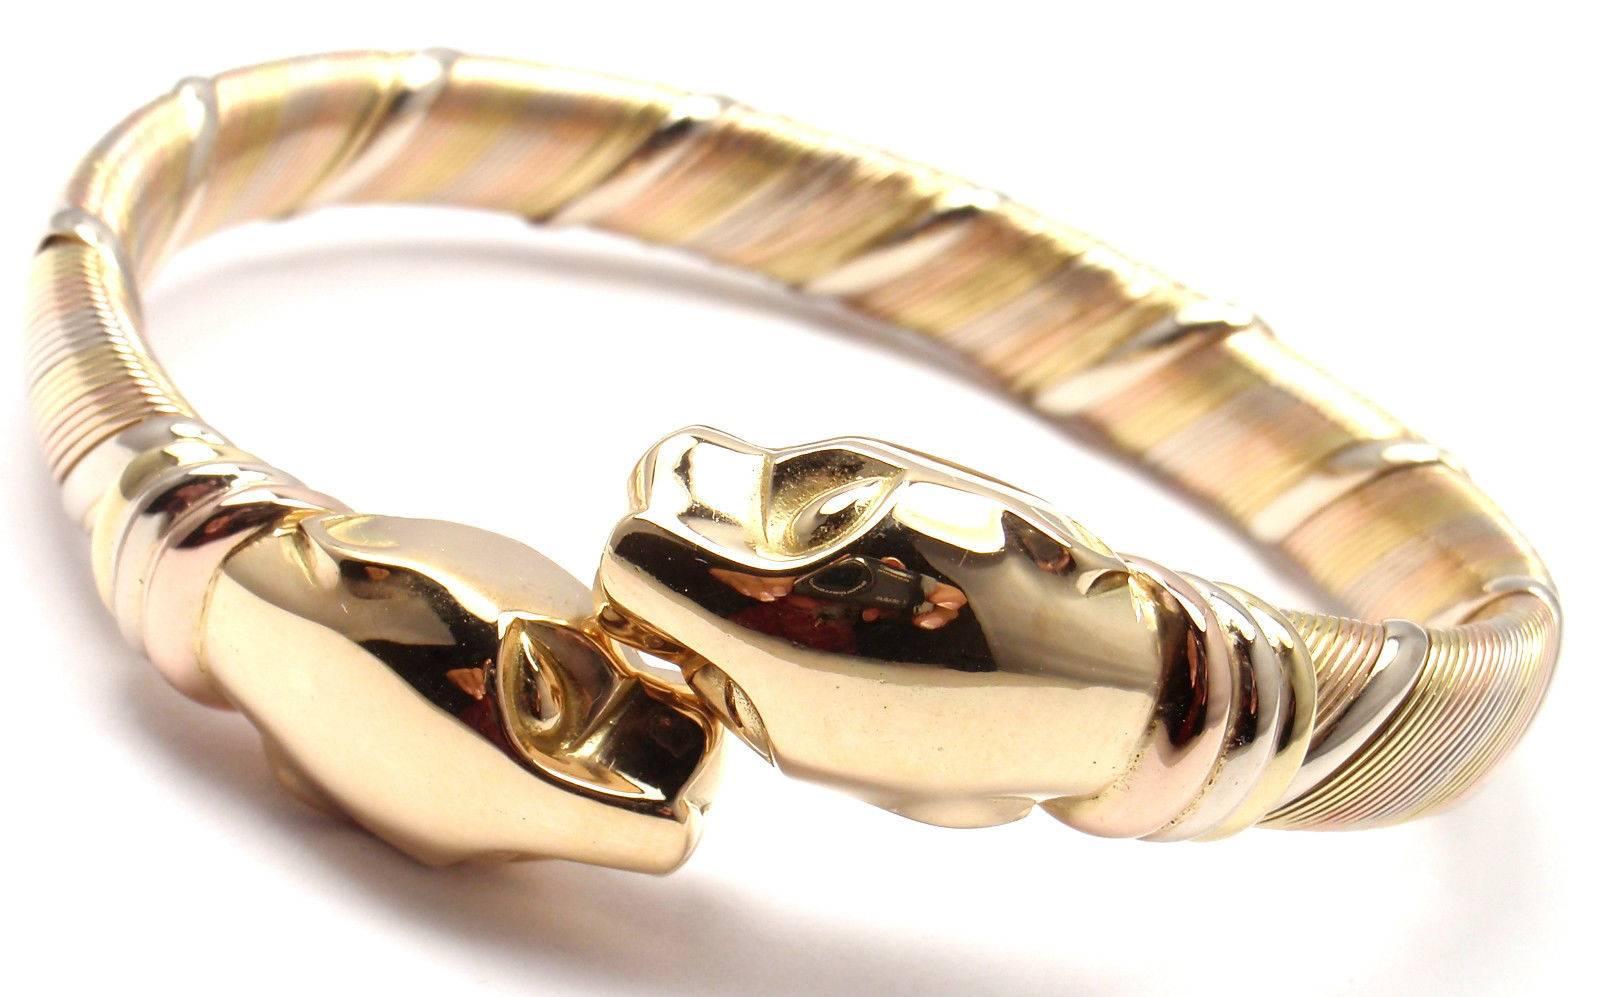 18k Tri-Color (Yellow, White, Pink) Gold Panther Bangle Bracelet by Cartier.
This beautiful bracelet comes with its original Cartier box.

Details:
Weight: 48.6 grams
Length: 7